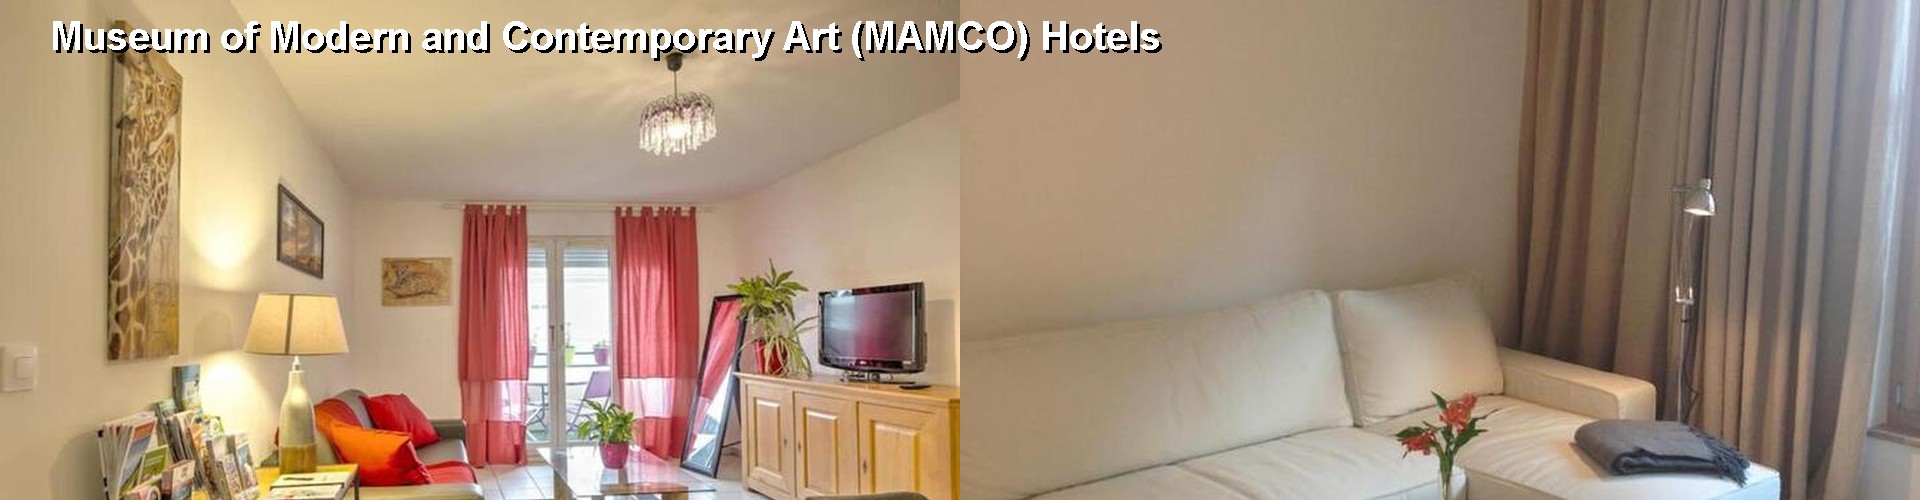 5 Best Hotels near Museum of Modern and Contemporary Art (MAMCO)